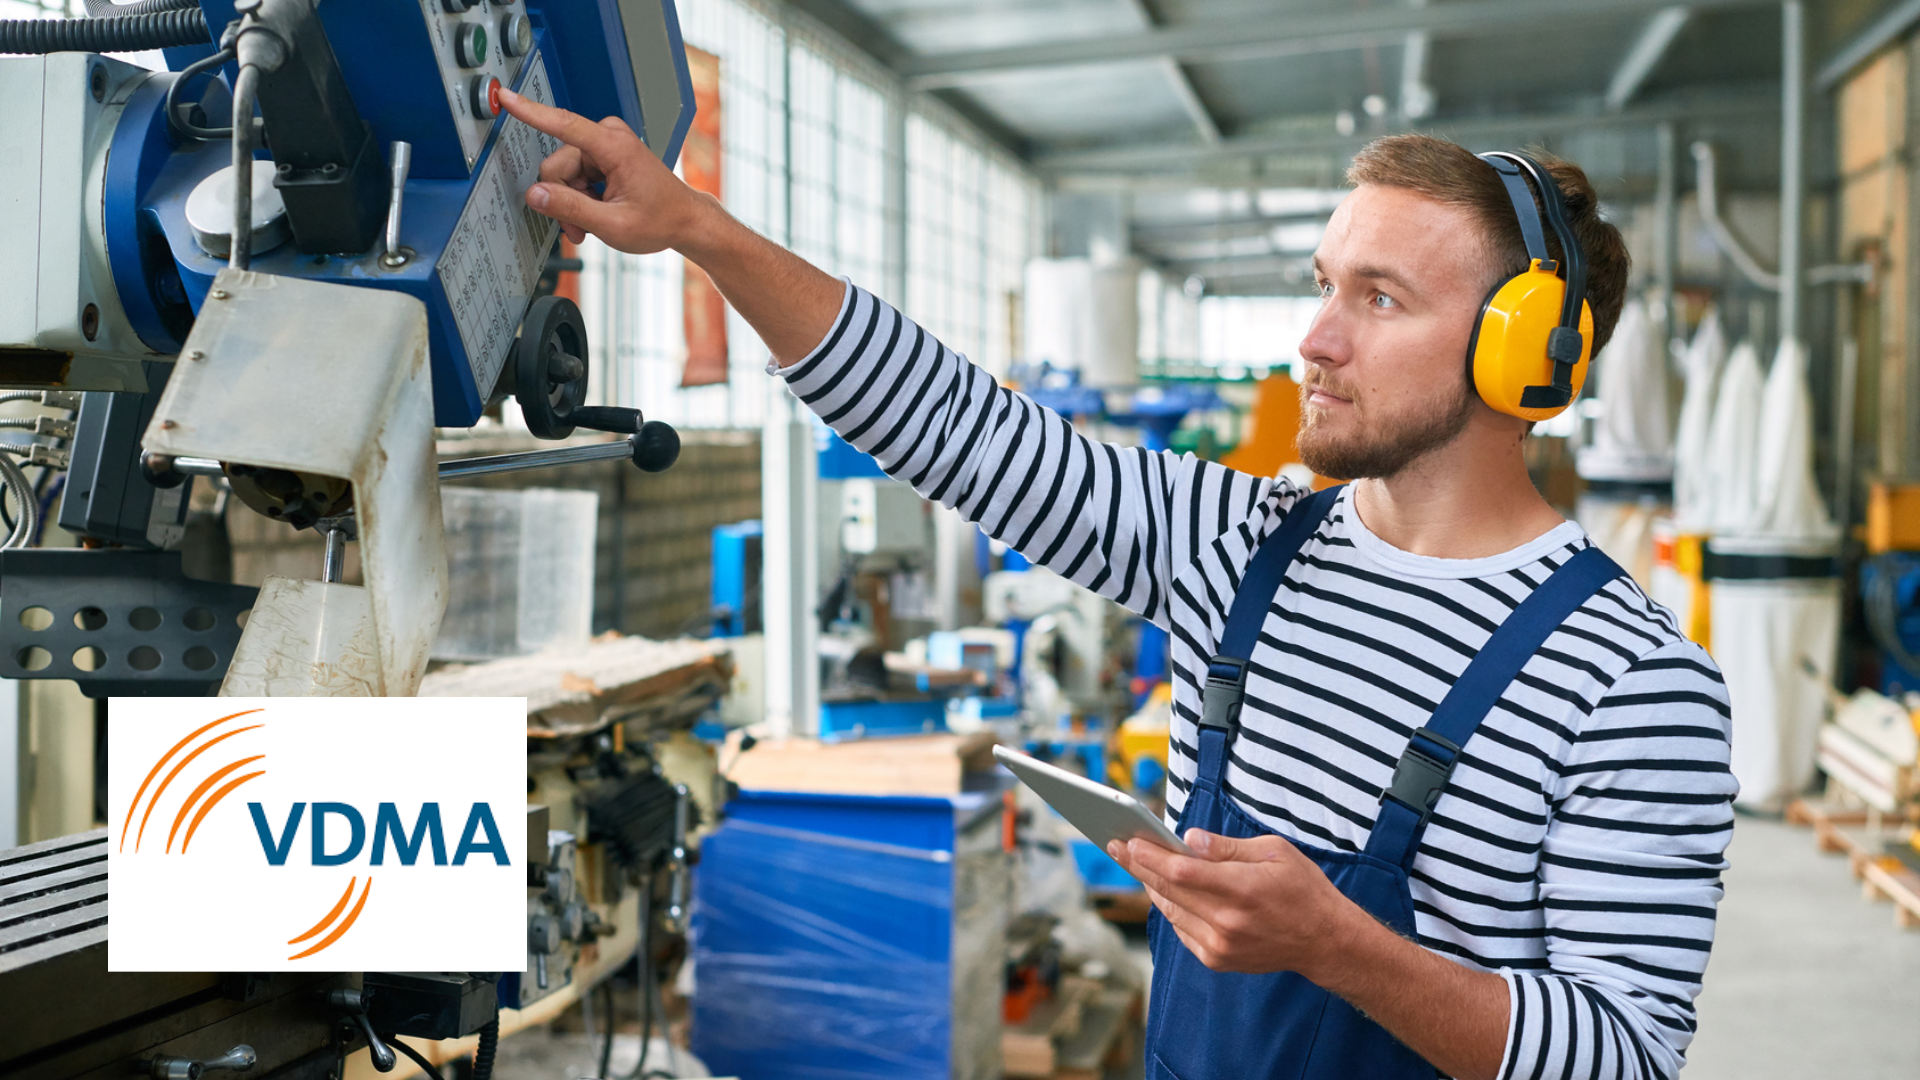 VDMA Conference on Documentation Creation in Mechanical Engineering